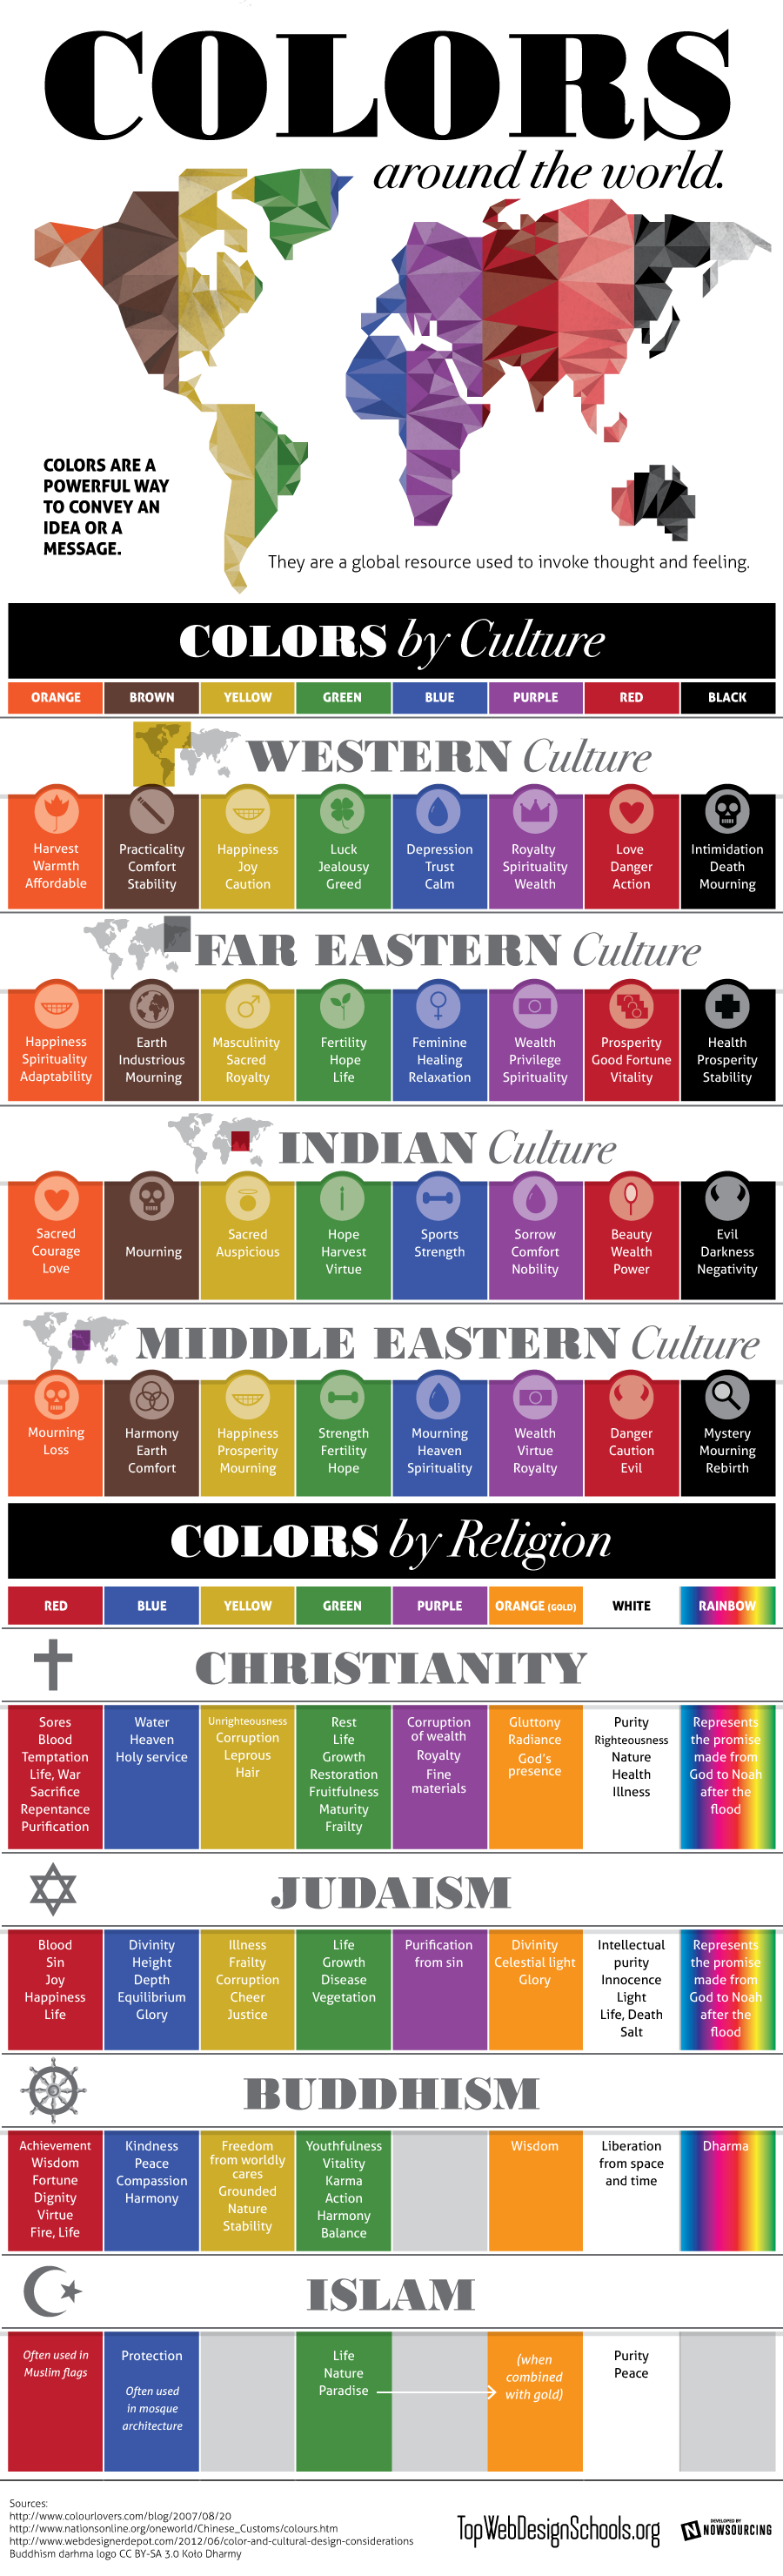 Understanding the Nuances of Our World in Color - Infographic